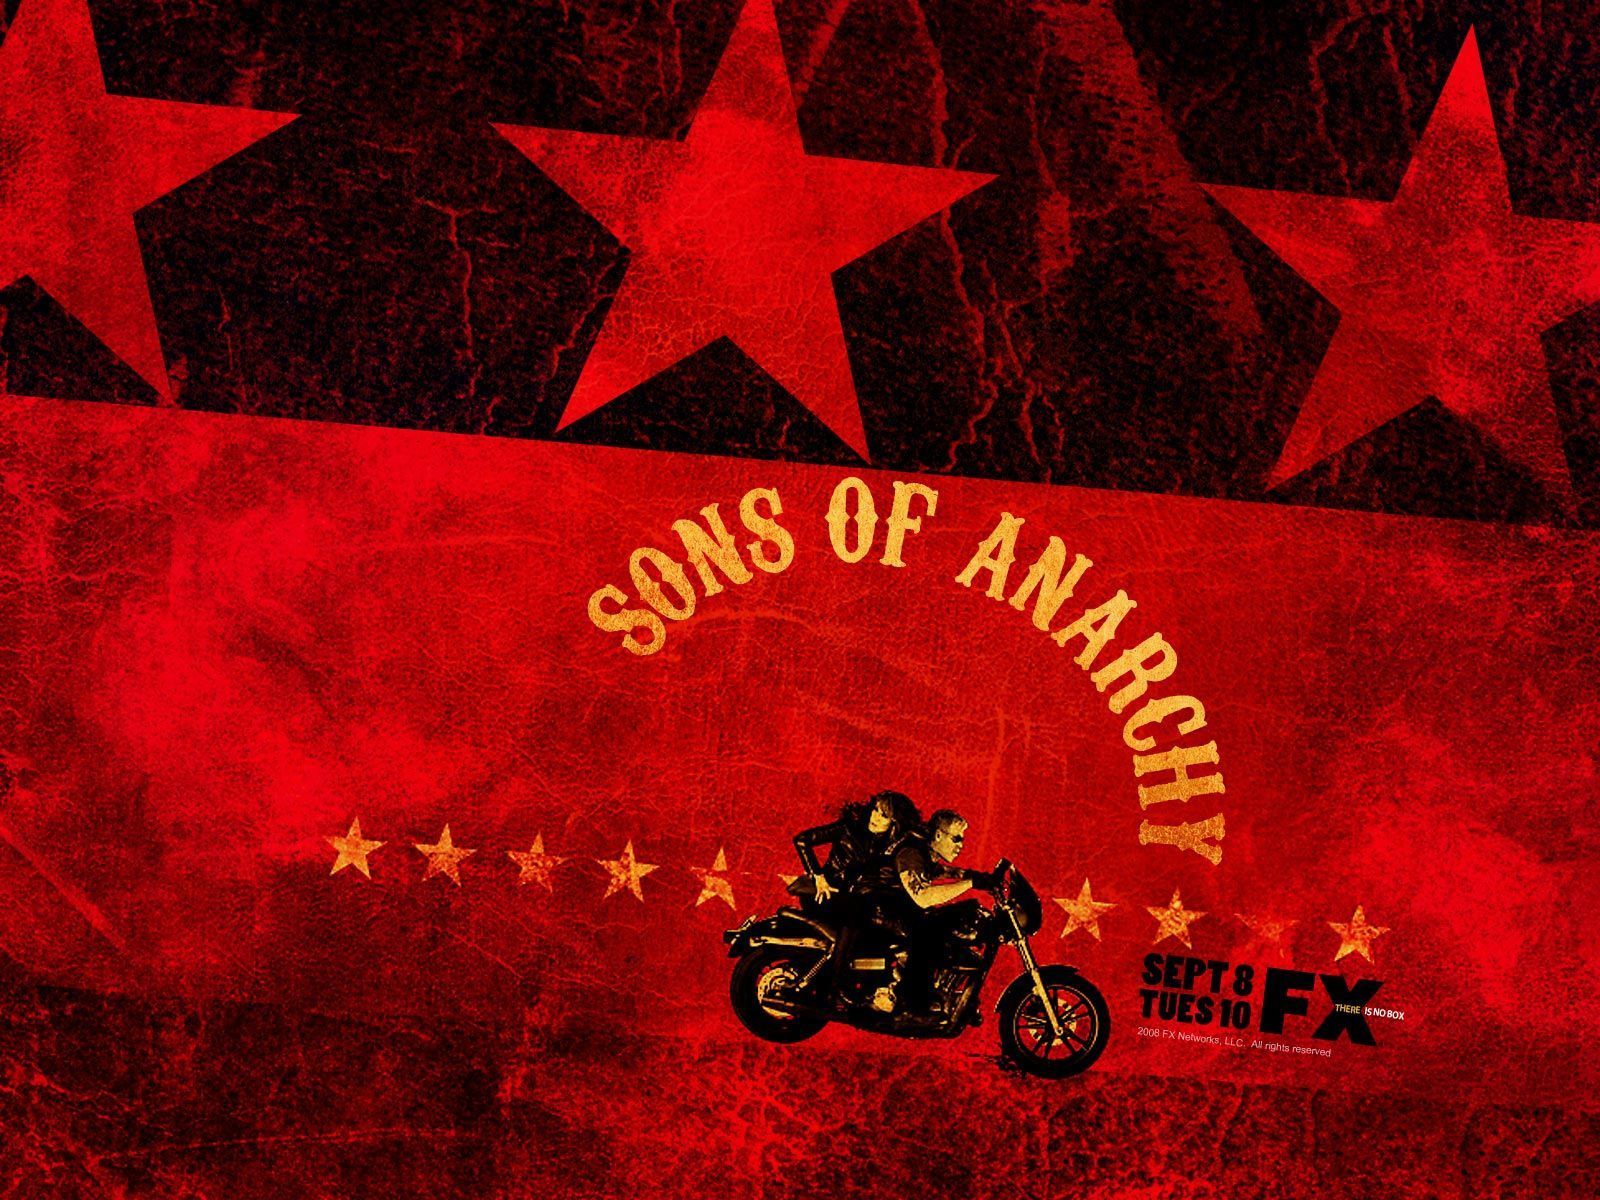 Sons Of Anarchy | Free Desktop Wallpapers for HD, Widescreen and ...